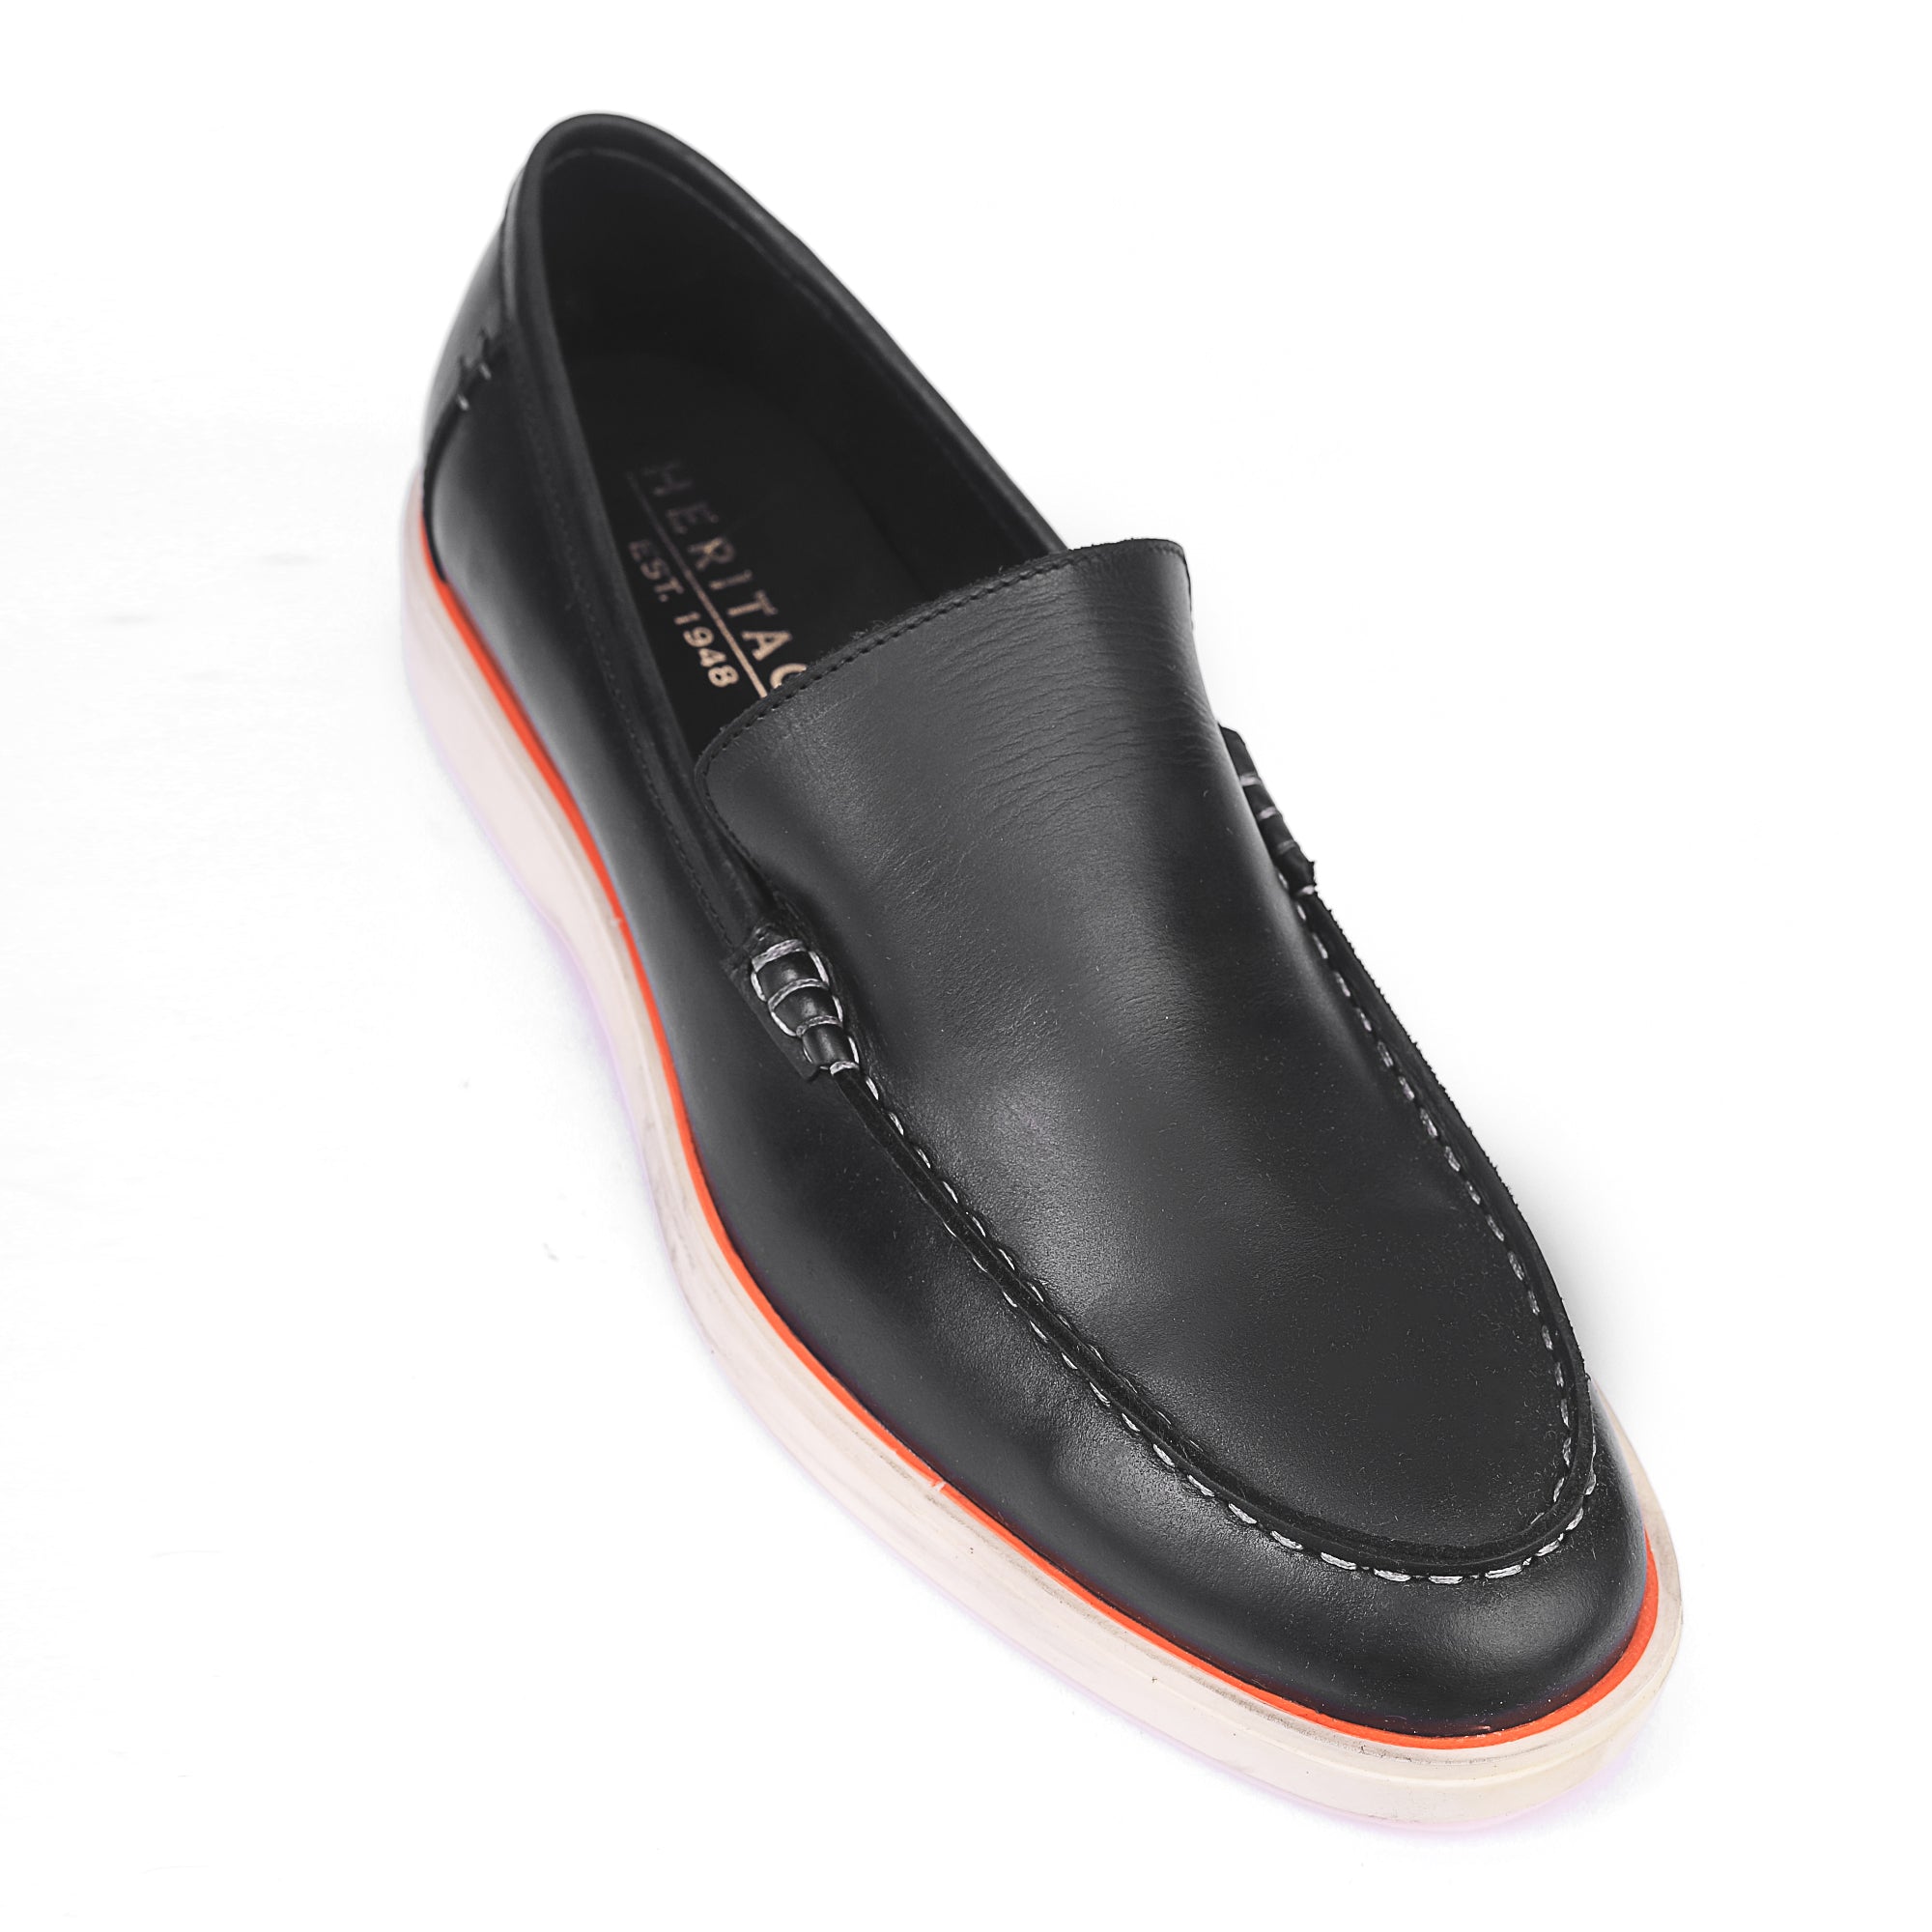 Heritage Black Leather Flat Loafers For Men